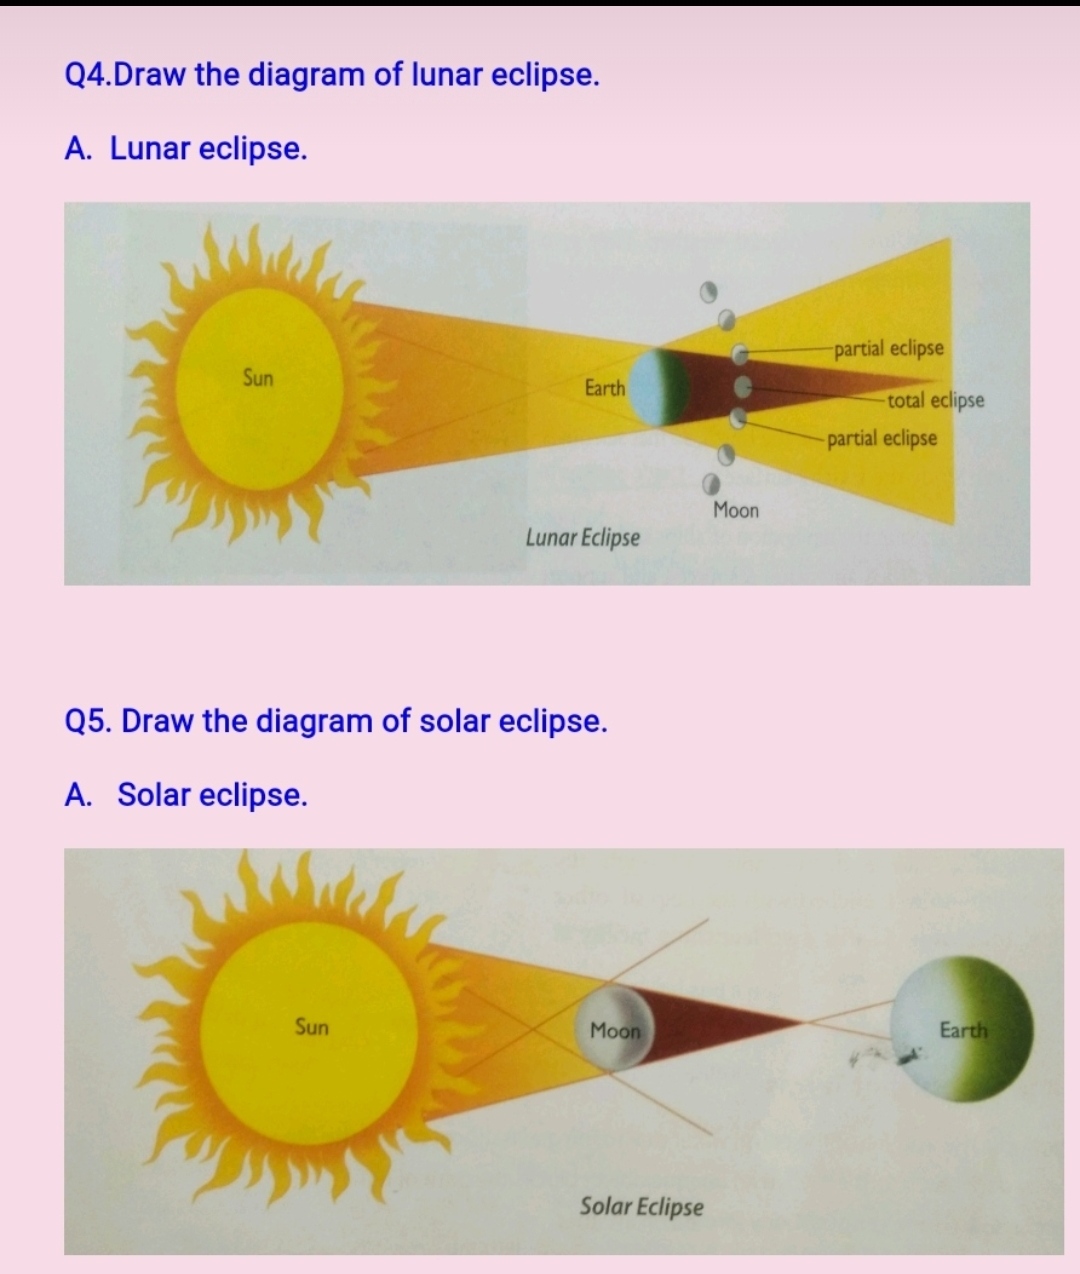 File:Eclipse 2 (PSF).png - Wikimedia Commons